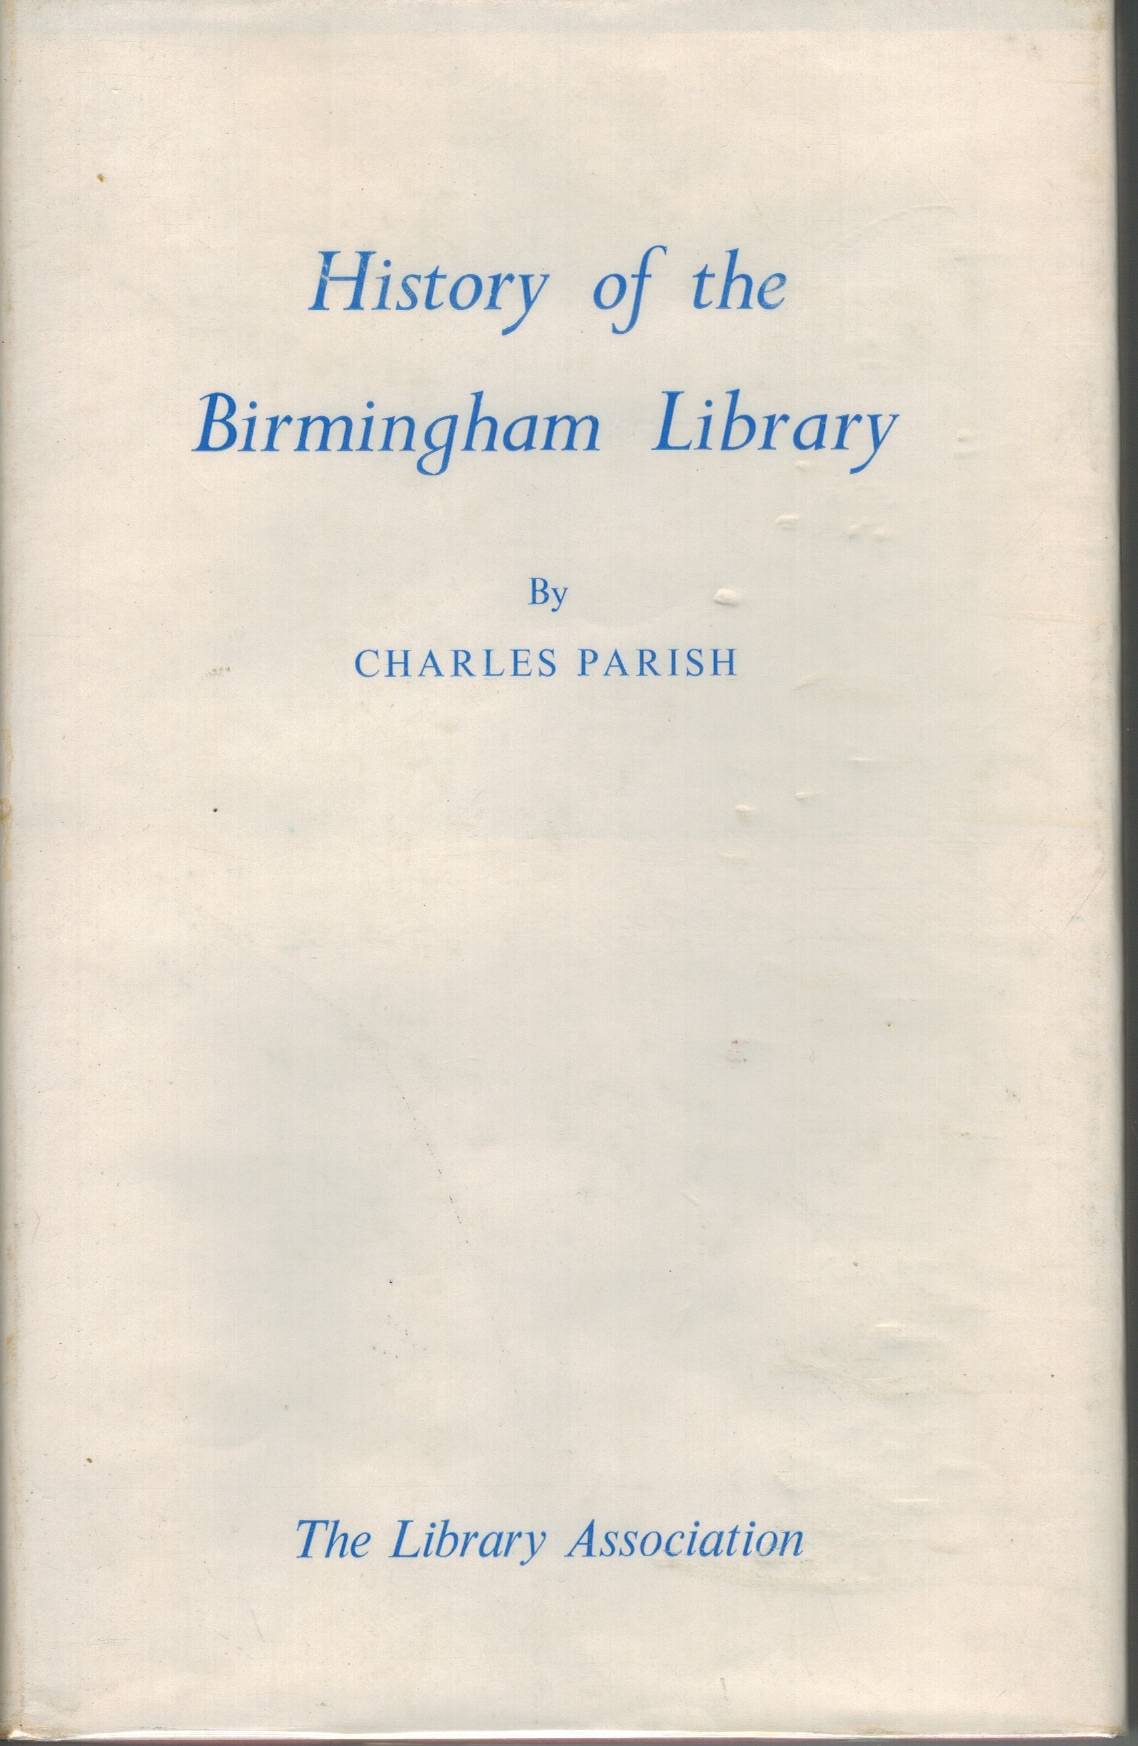 History of the Birmingham Library: An Eighteenth Century Proprietary  Library as Described in the Annal of the Birmingham Library, 1779-1799  with a Chapter on the Later history of the Library to 1955 - books-new